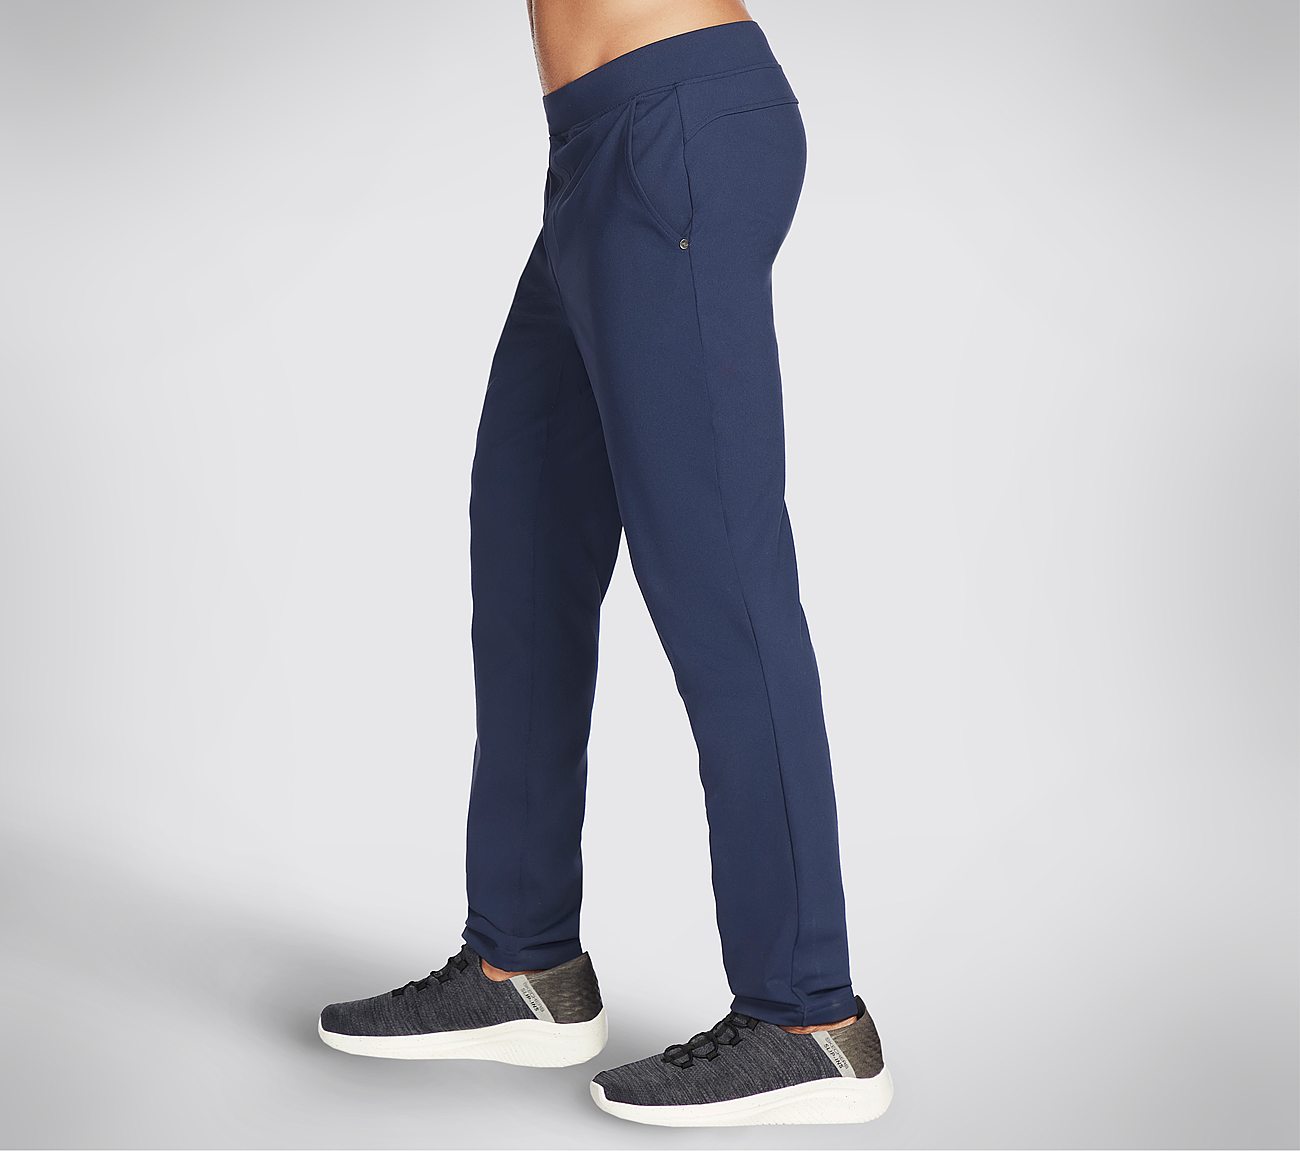 THE GOWALK PANT CONTROLLER, NNNAVY Apparel Left View